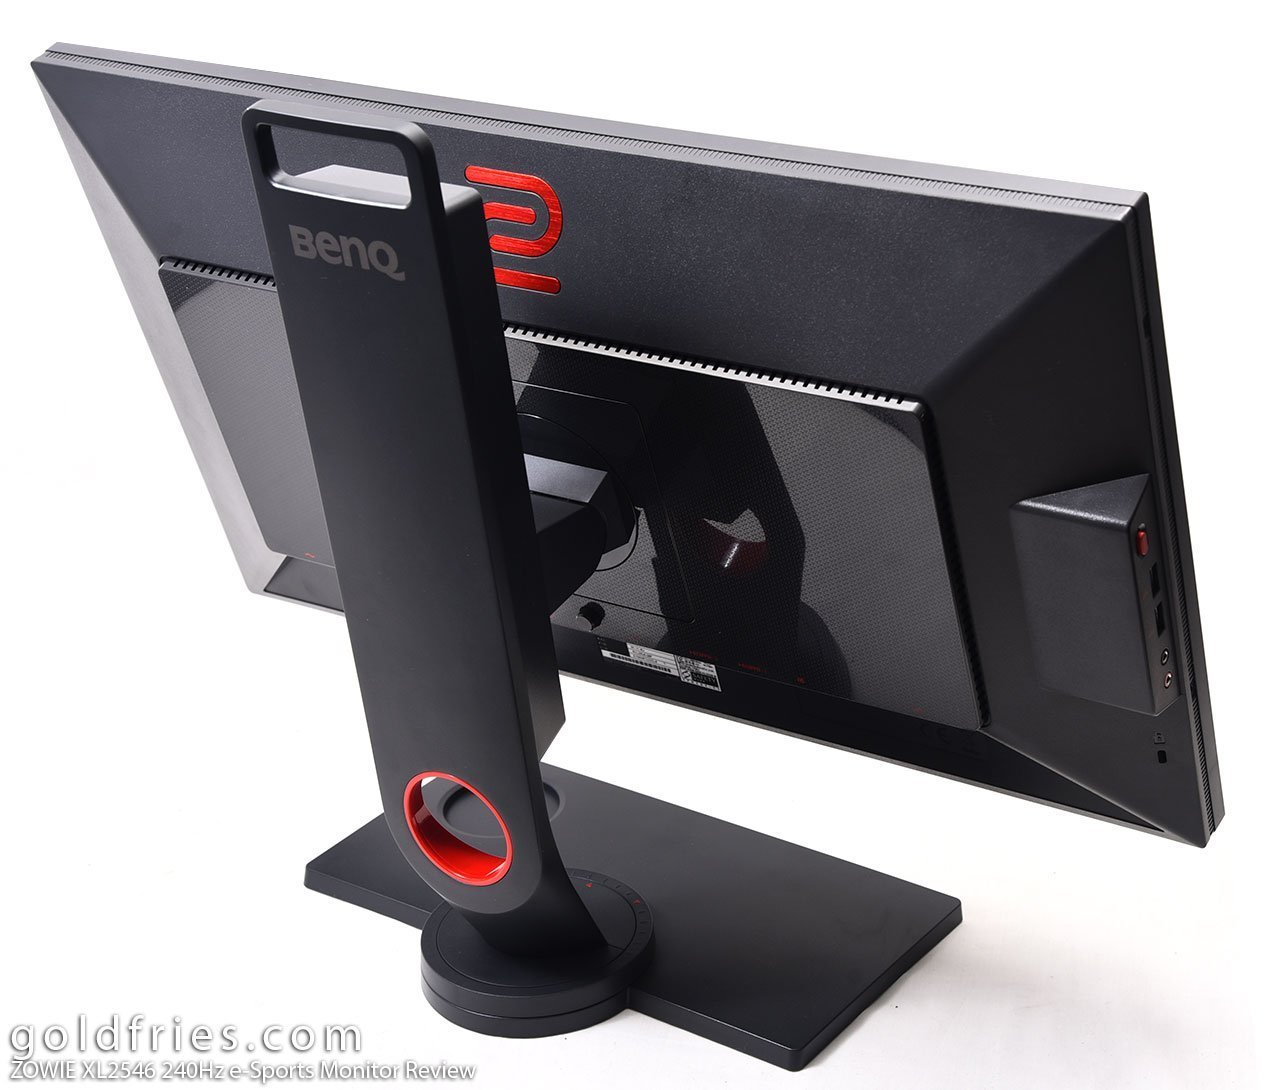 ZOWIE XL2546 240Hz e-Sports Monitor Review – goldfries